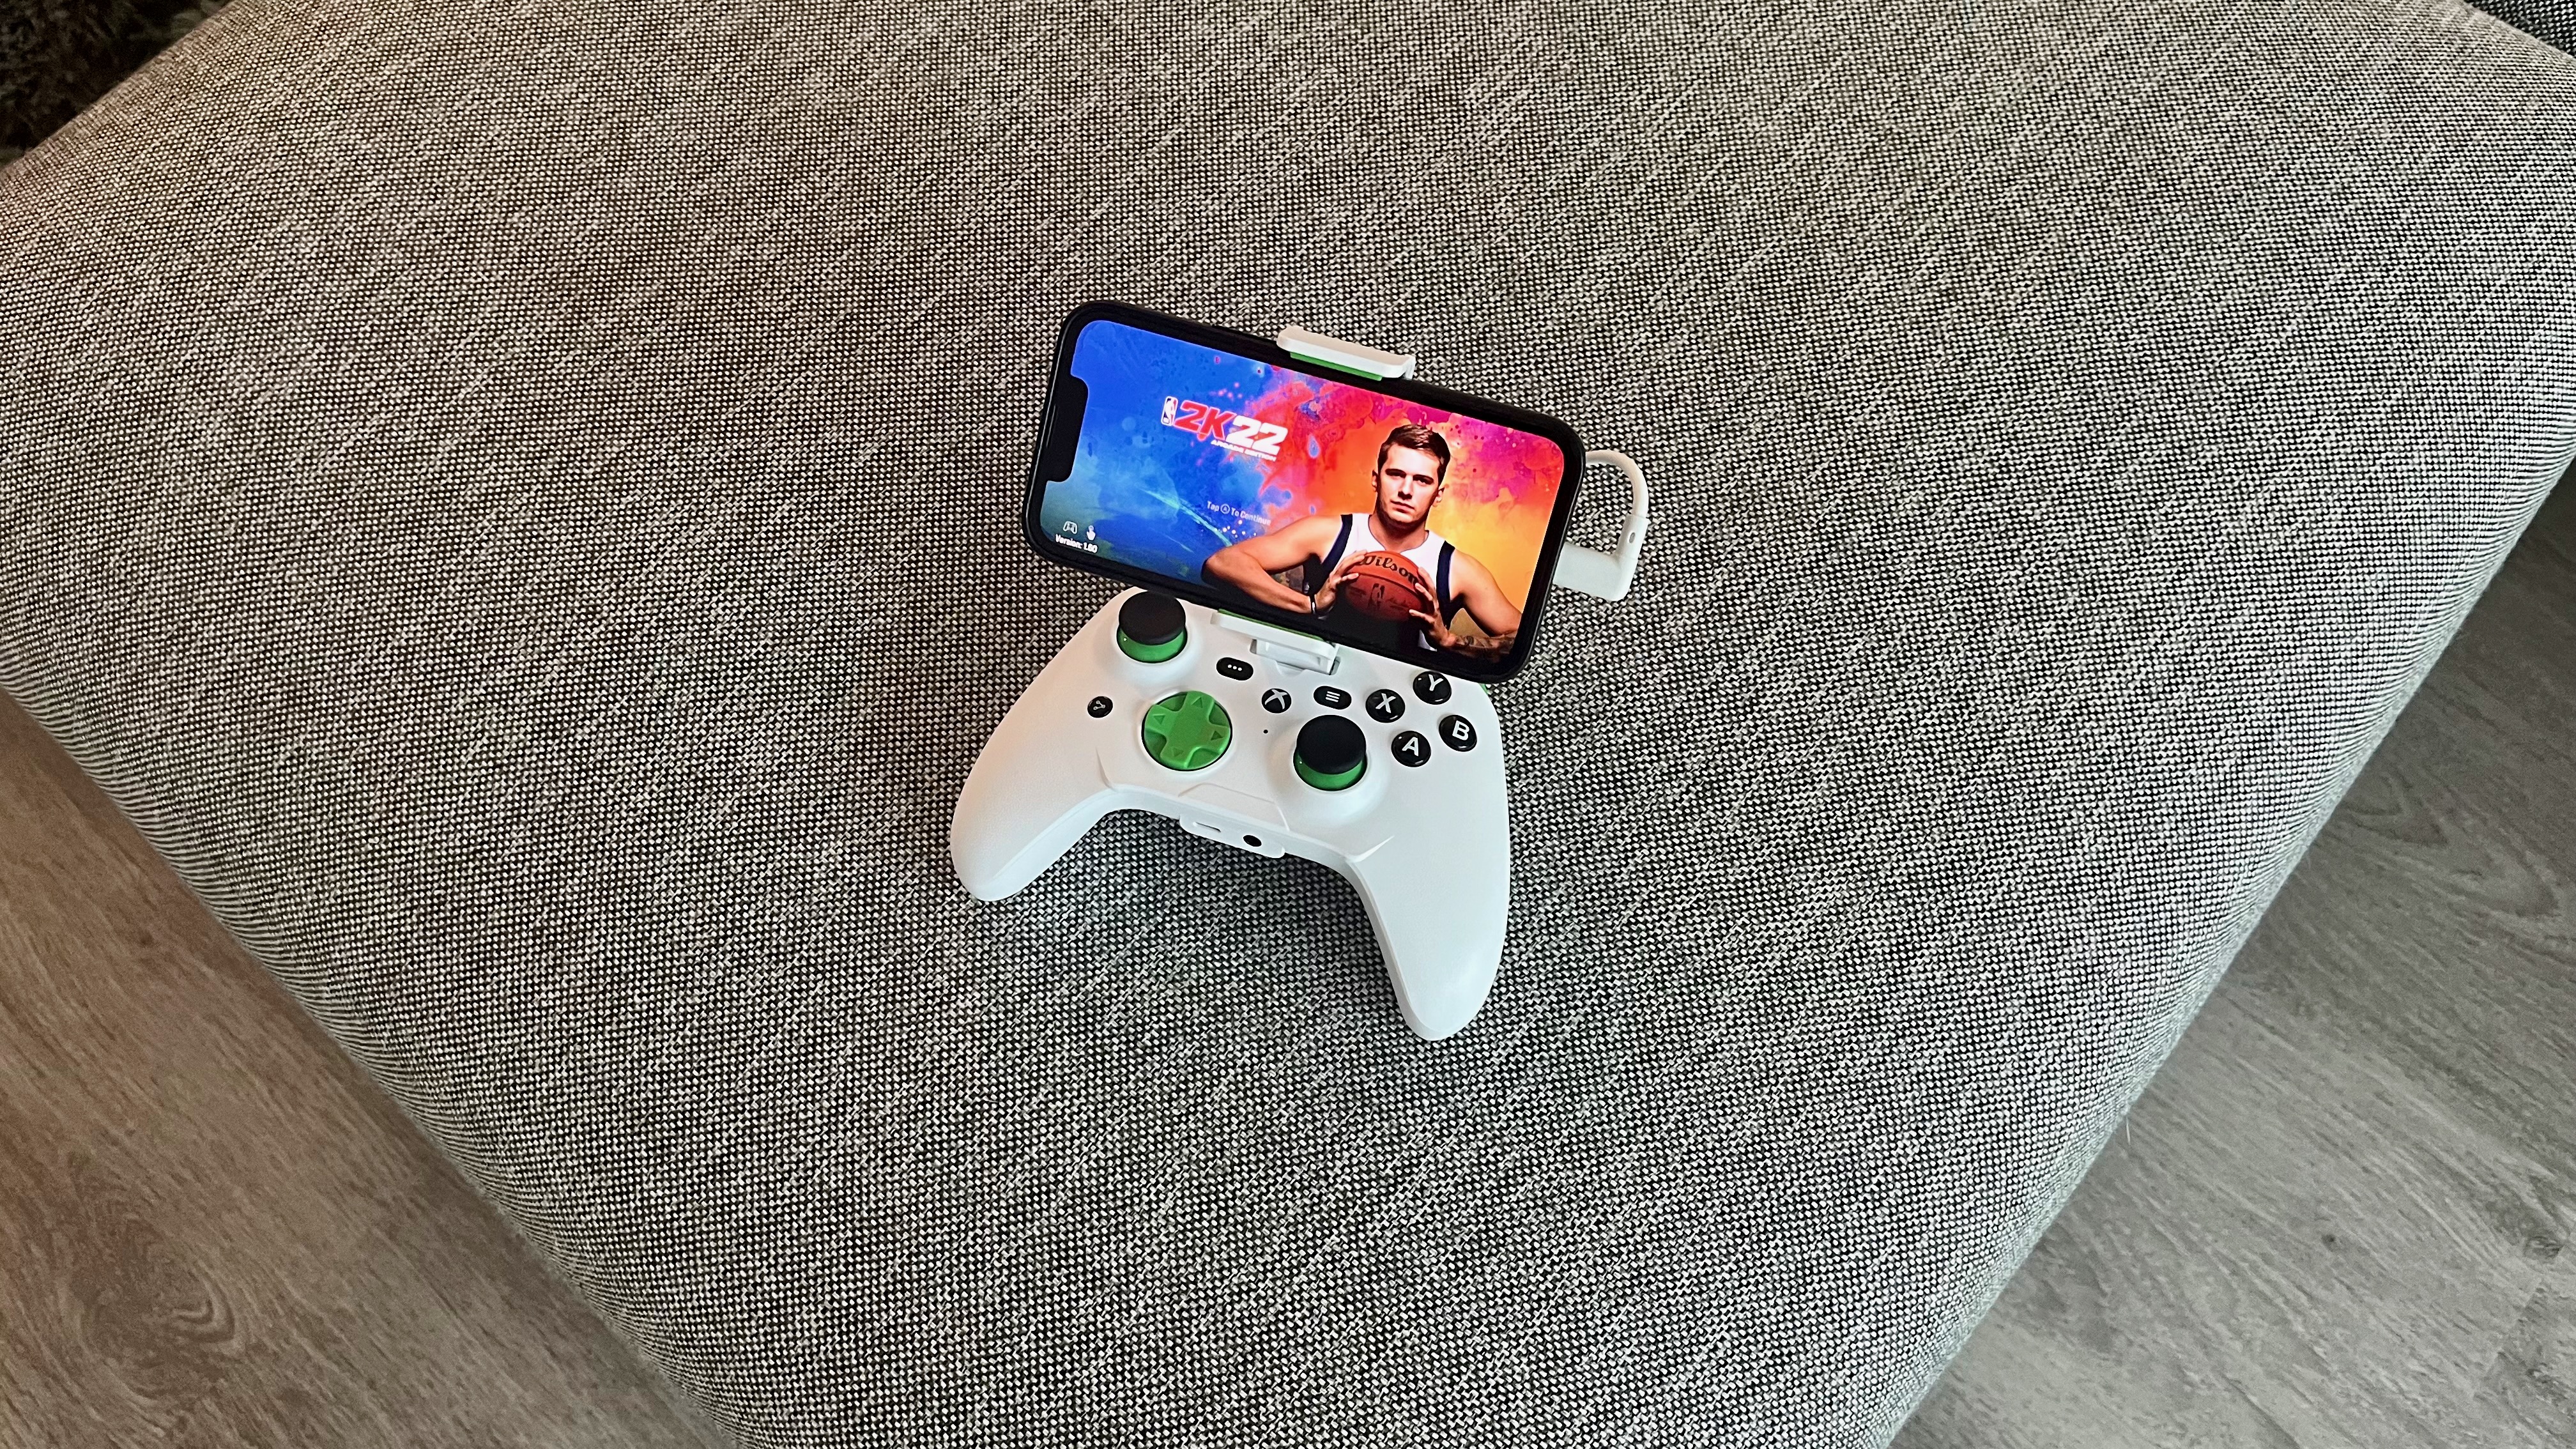 The RiotPWR Xbox Cloud Gaming Controller for iOS on a couch